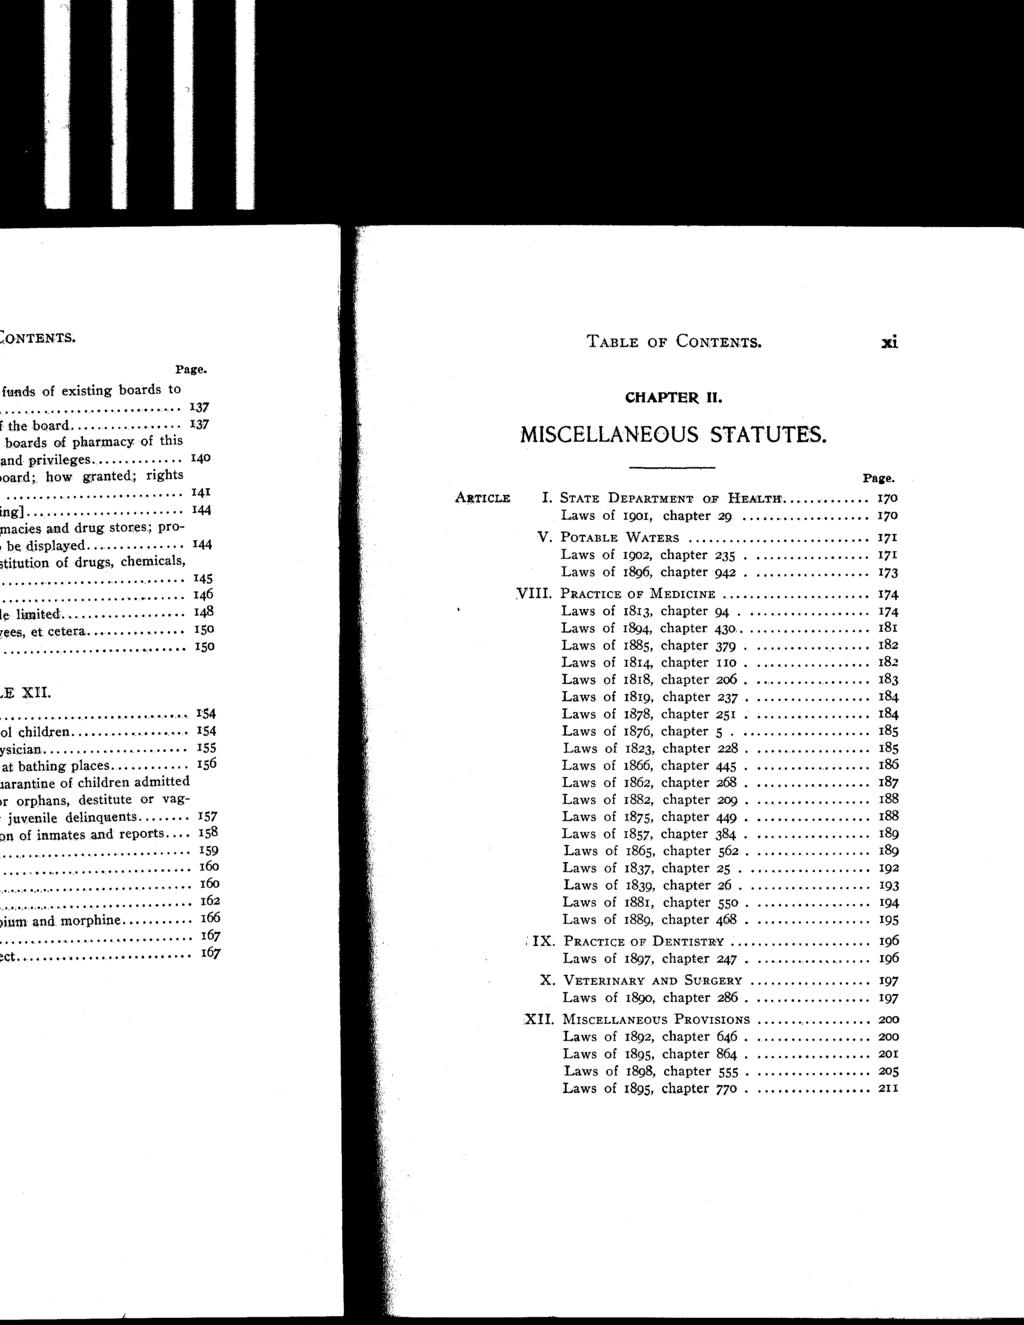 TABLE OF CONTENTS. CHAPTER II. MISCELLANEOUS STATUTES. ARTICLE Page. I. STATE DEPARTMENT OF HEALTIr 170 Laws of 190.1, chapter 29. 170 V. POTABLE WATERS 171 Laws of 1902, chapter 235.